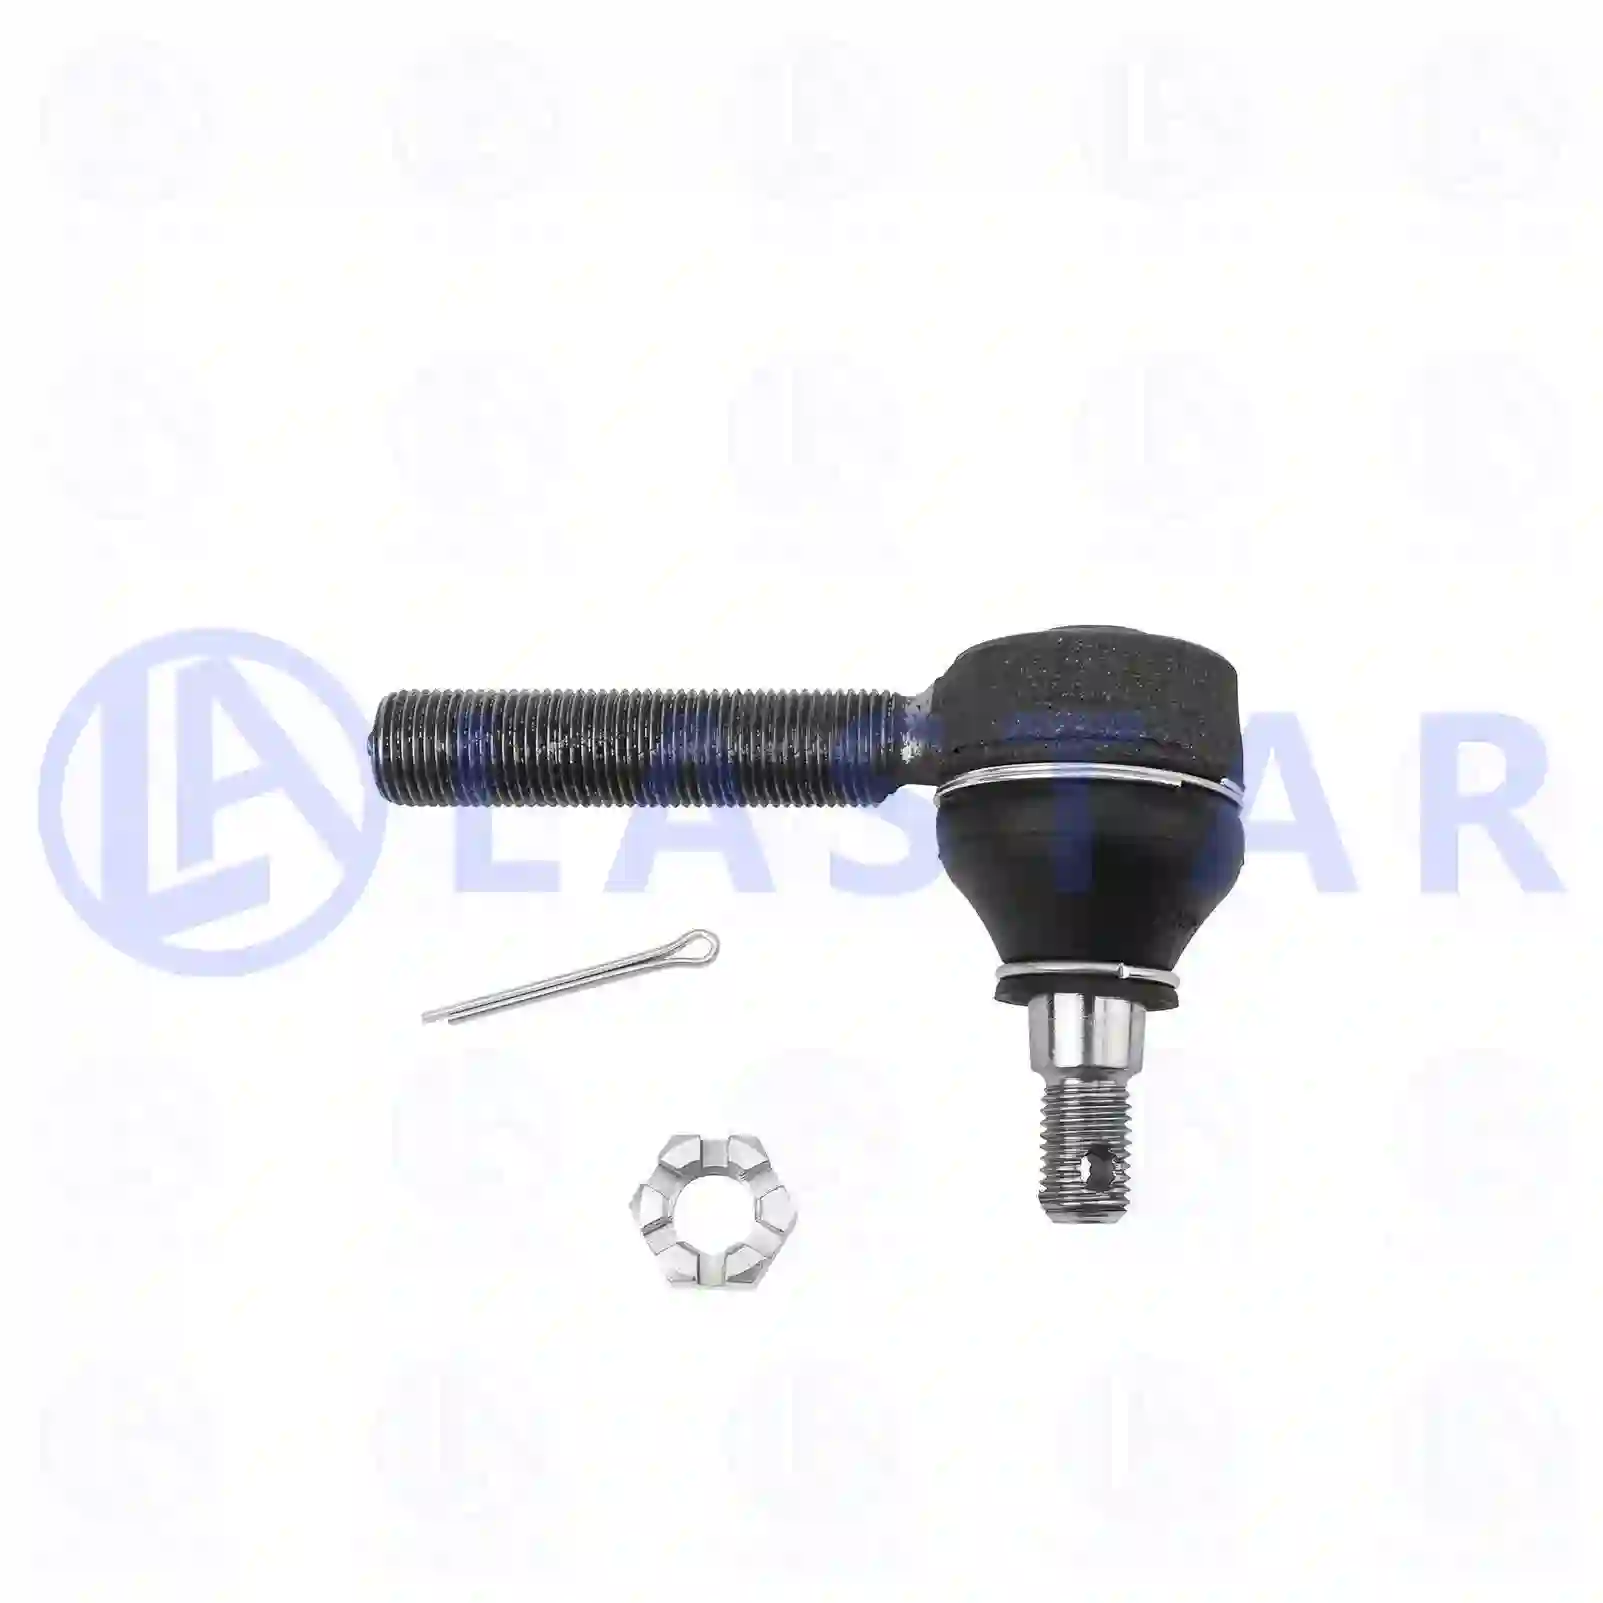 Ball joint, right hand thread, 77732092, 1668179, 1669010, ZG40141-0008 ||  77732092 Lastar Spare Part | Truck Spare Parts, Auotomotive Spare Parts Ball joint, right hand thread, 77732092, 1668179, 1669010, ZG40141-0008 ||  77732092 Lastar Spare Part | Truck Spare Parts, Auotomotive Spare Parts